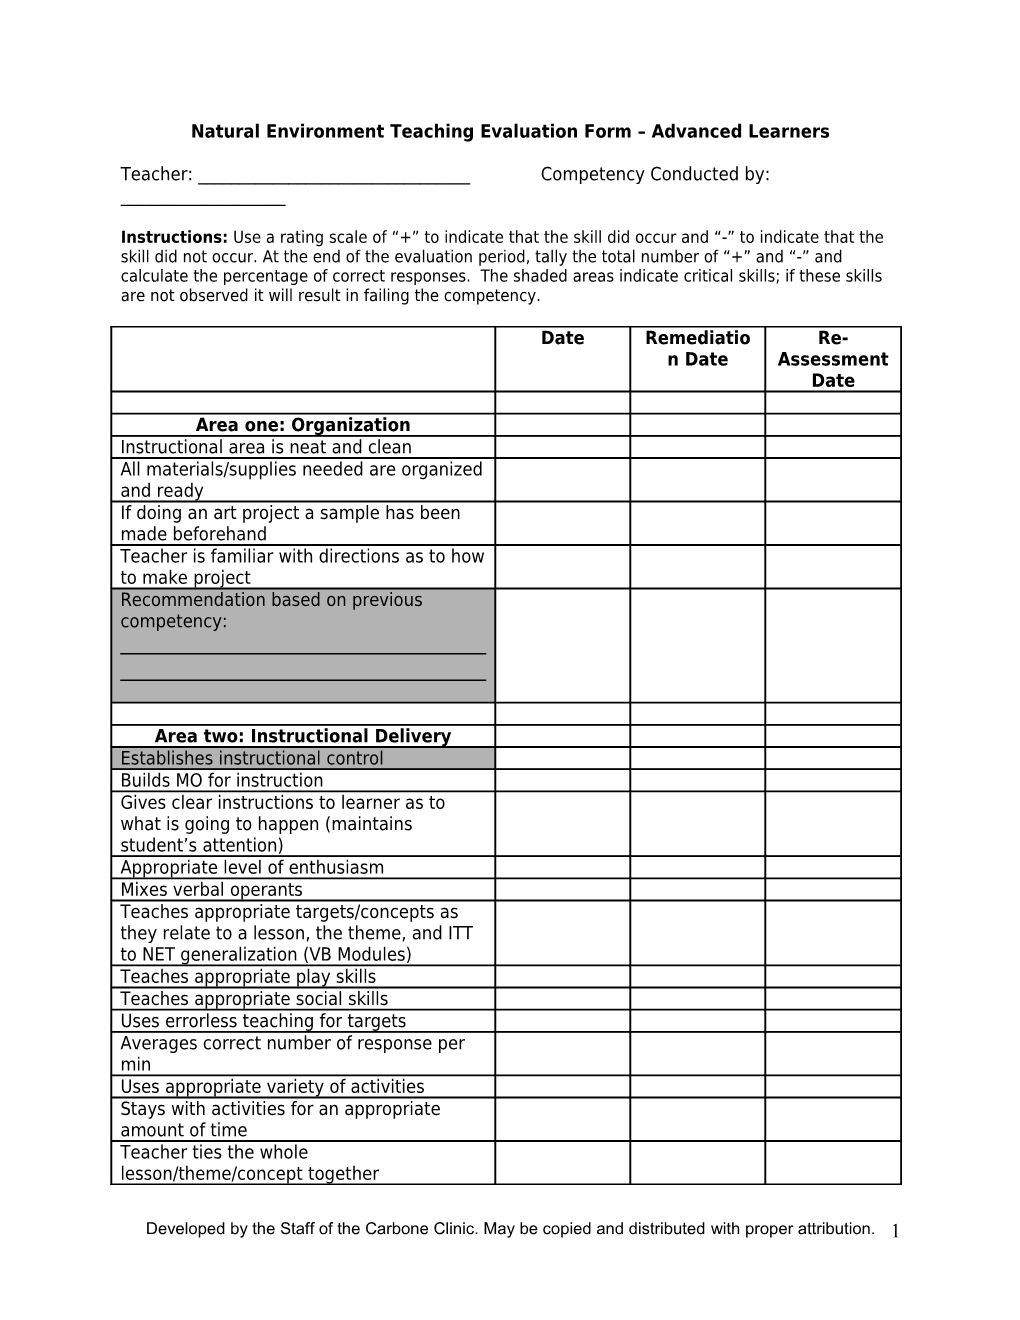 Natural Environment Teaching Evaluation Form